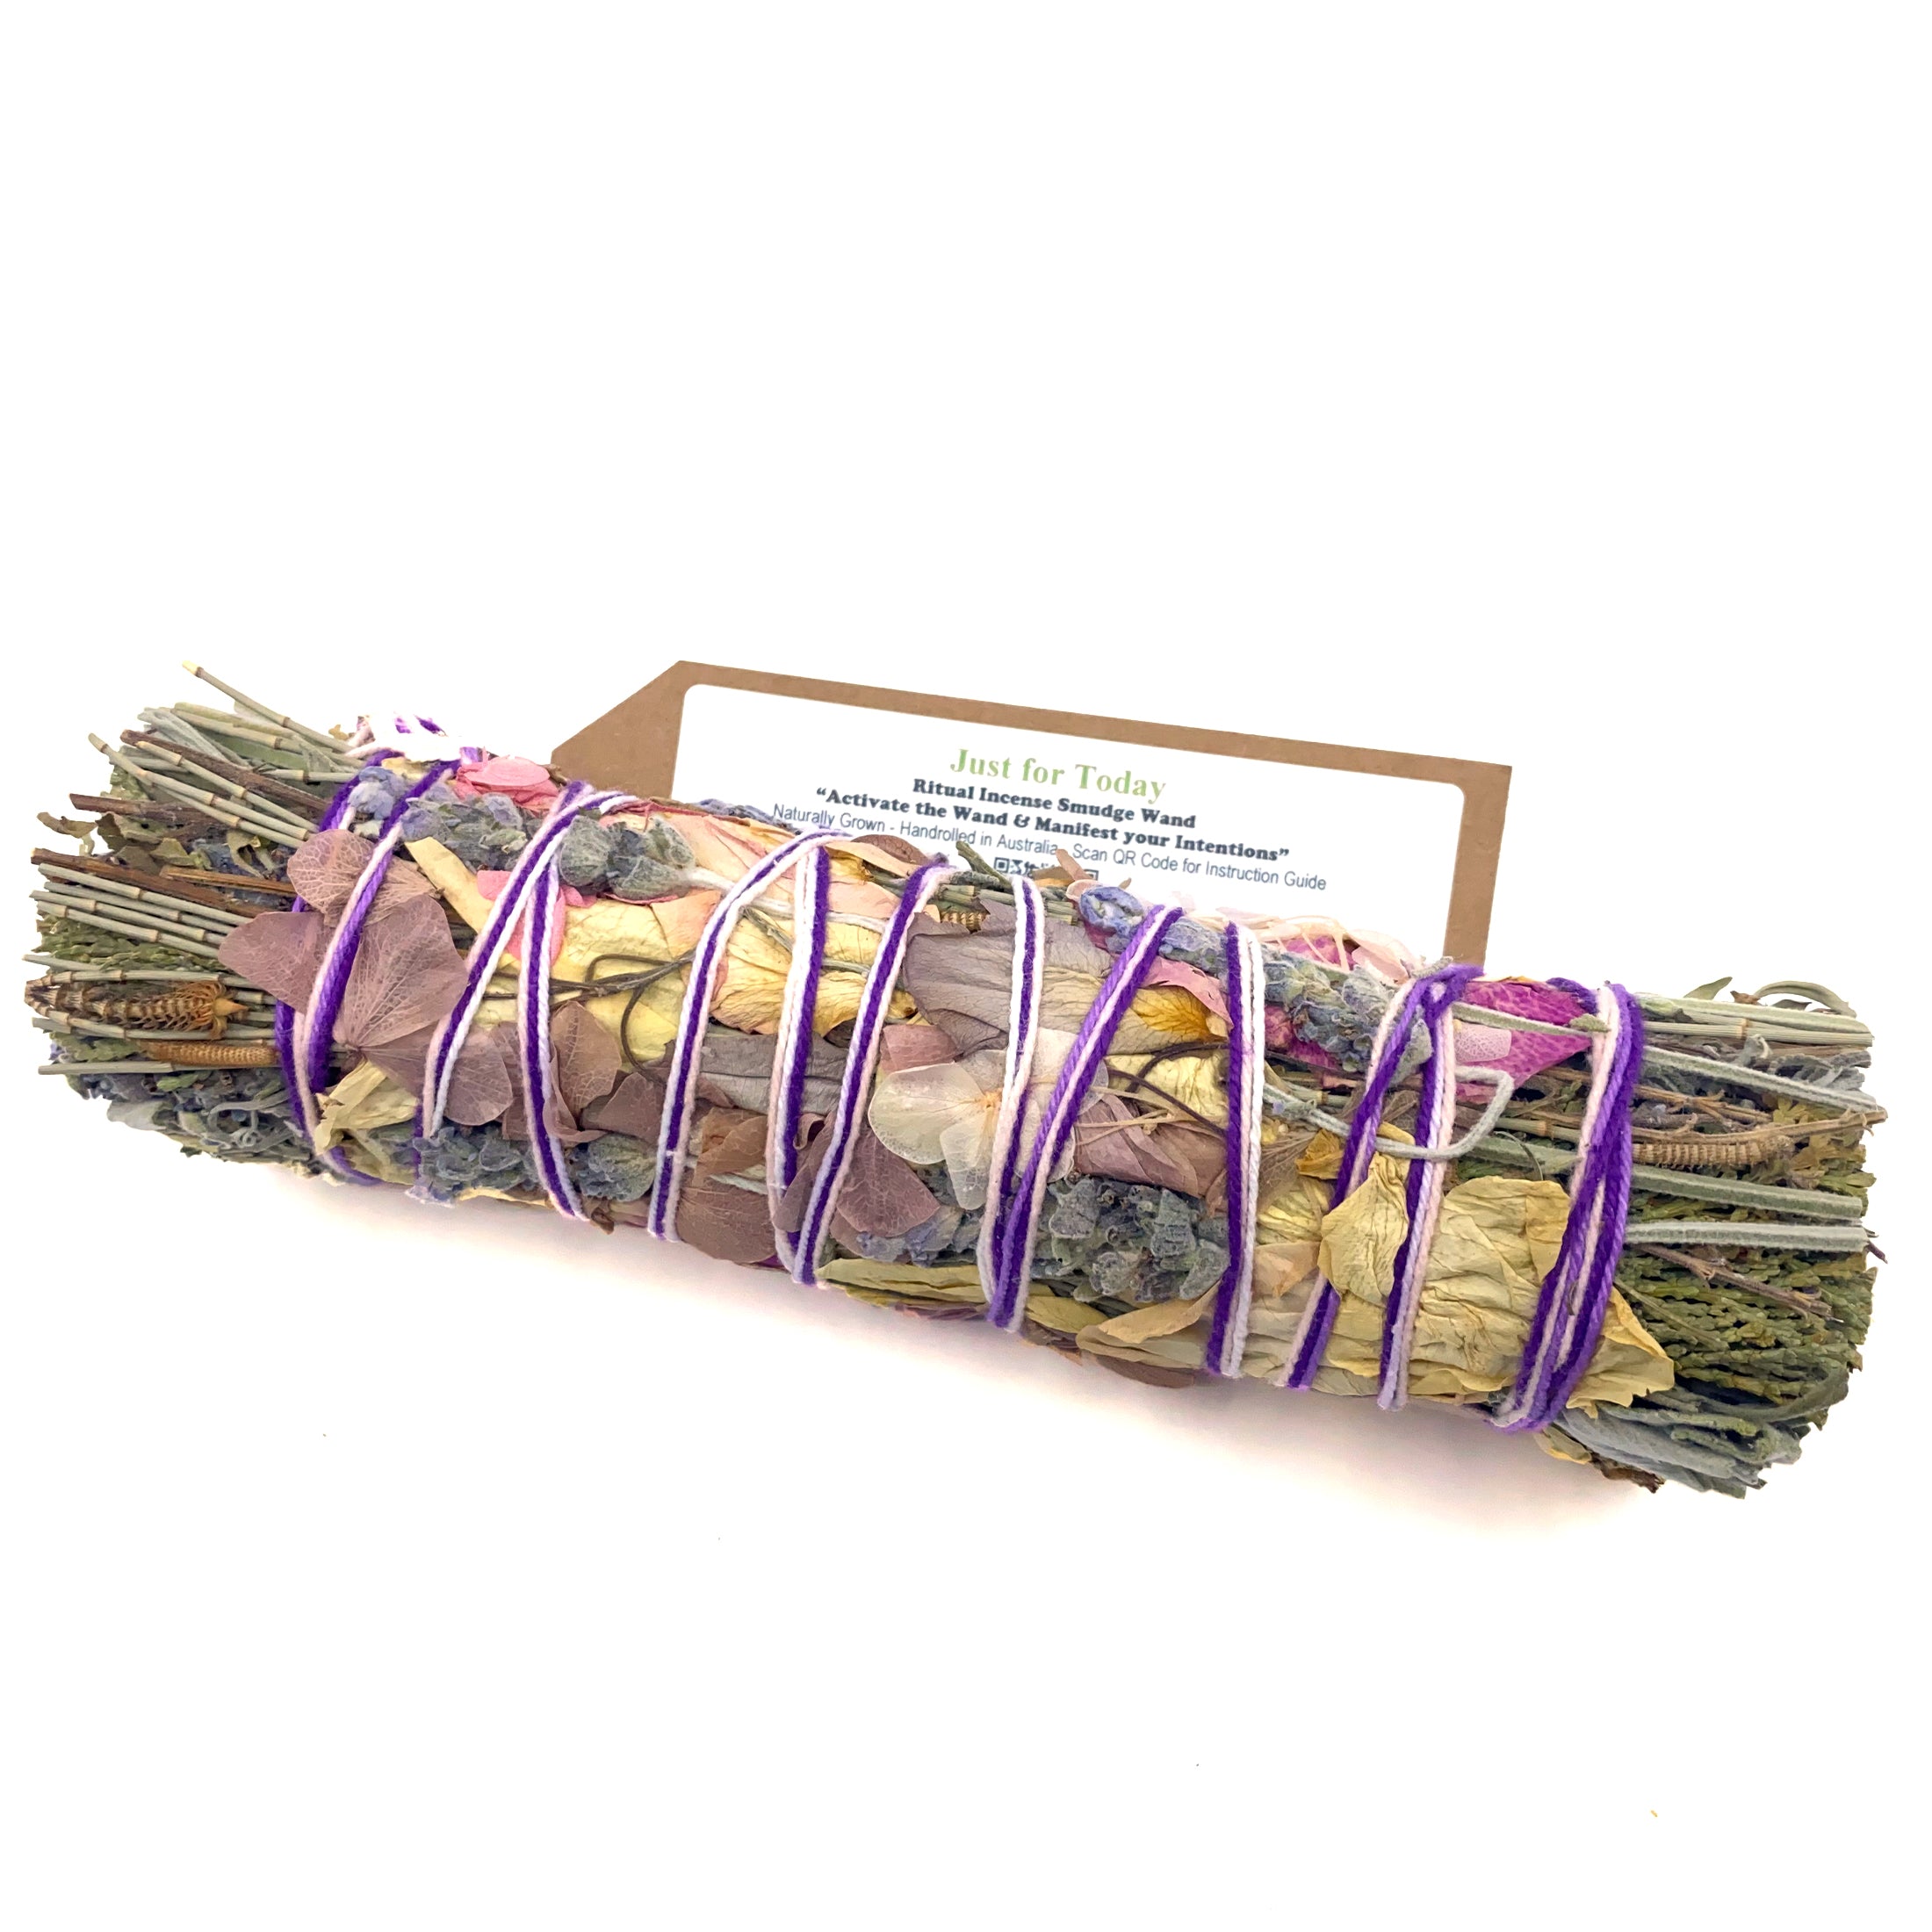 Just for Today - With Good Intentions Smudge Stick